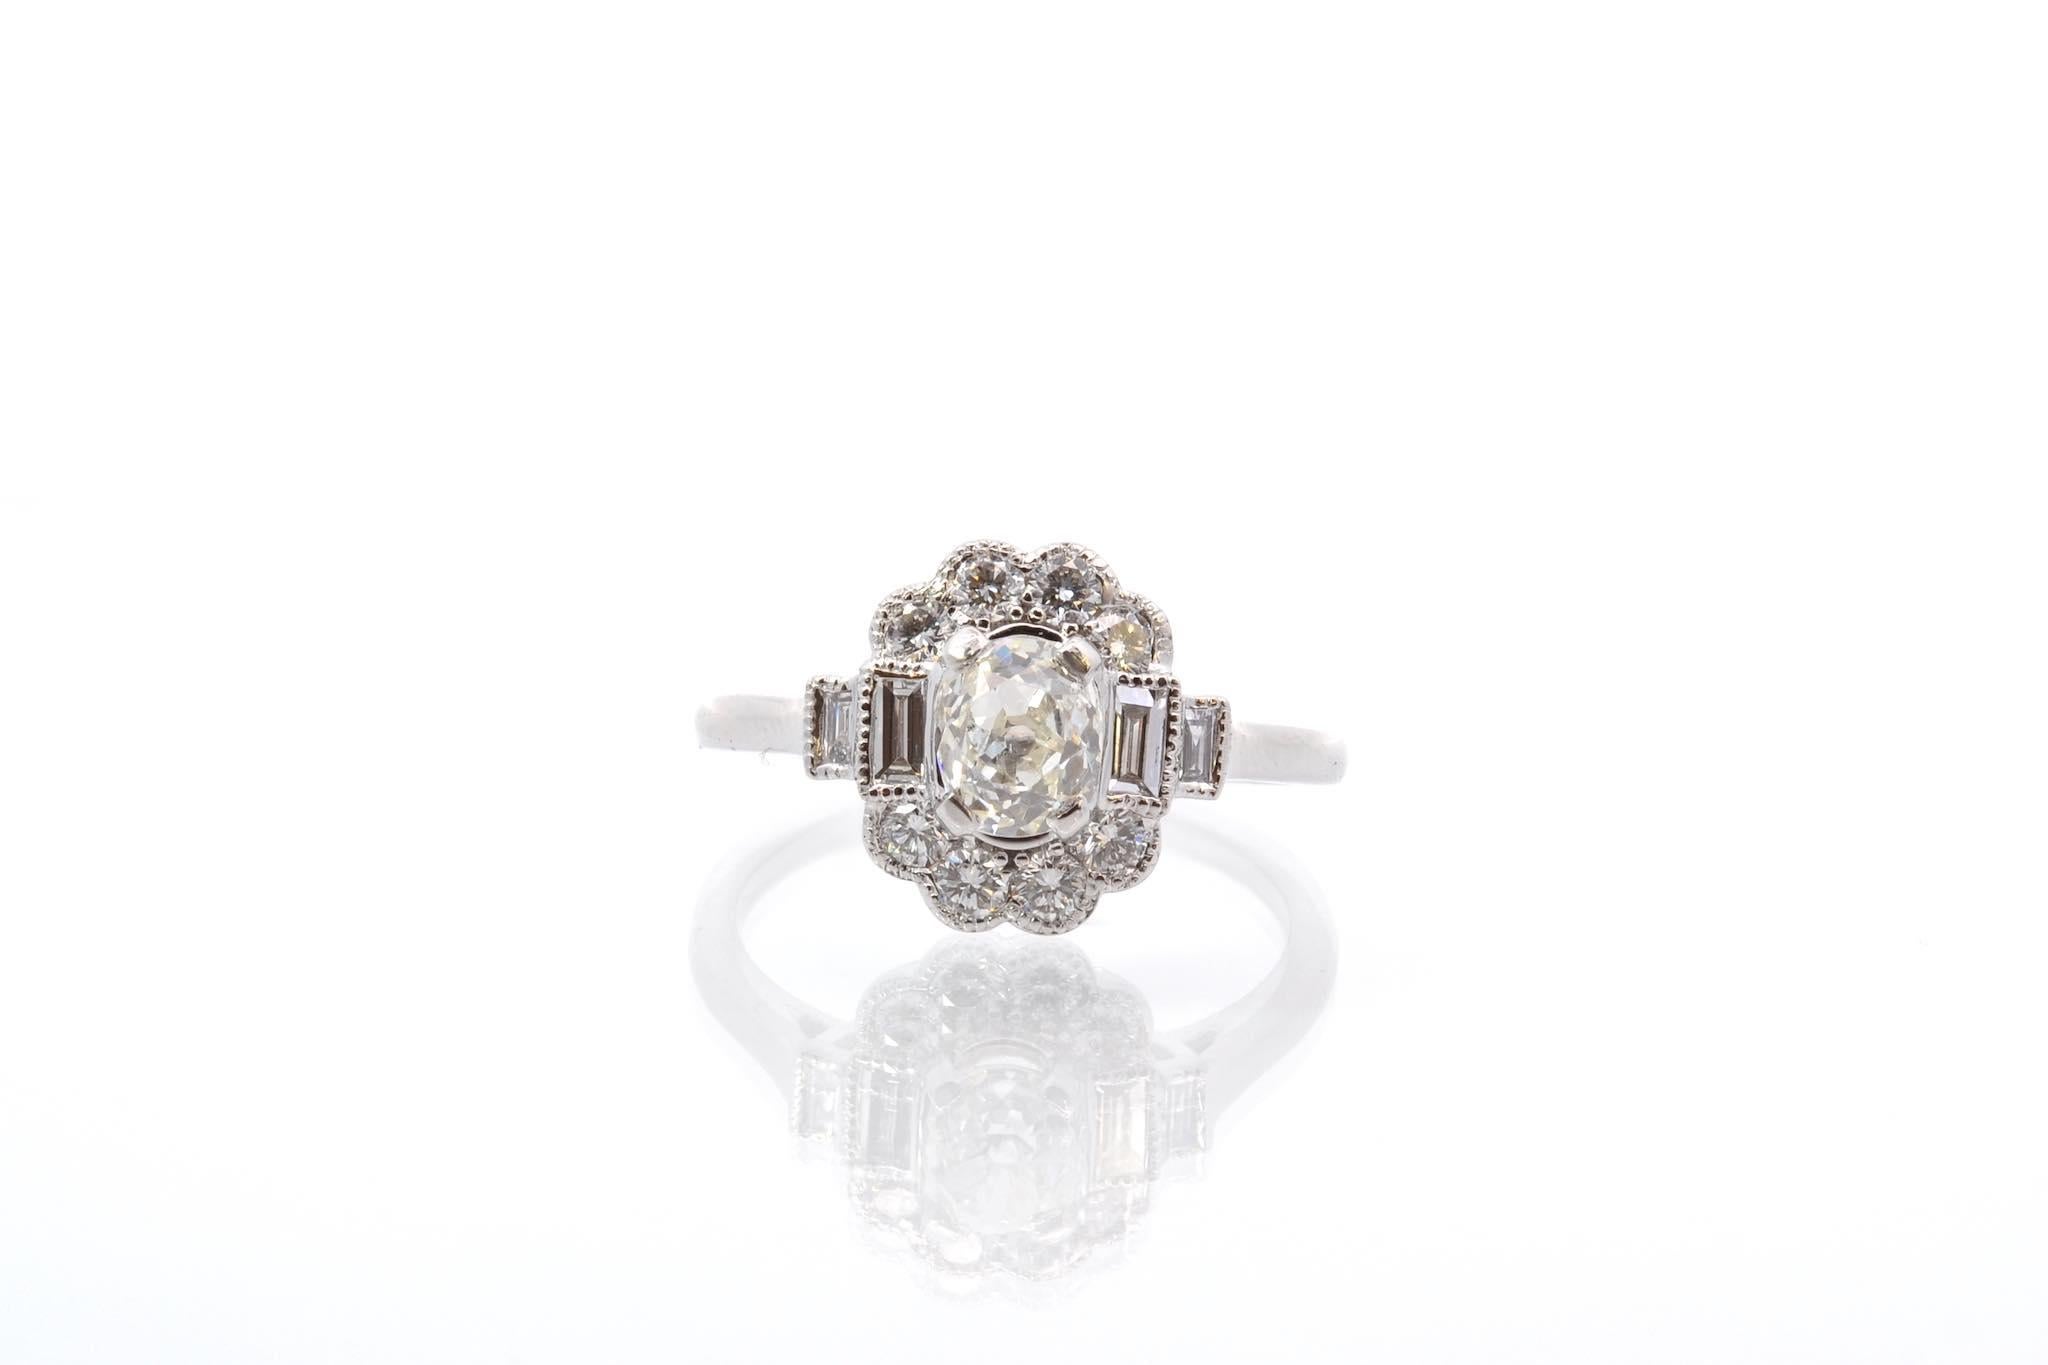 Stones: Cushion diamond: 0.83 ct I/SI2, 4 baguette diamonds: 0.20 ct and 8 diamonds: 0.30 ct
Material: 18k white gold
Dimensions: 1.3 x 1.1cm
Weight: 3.8g
Period: Recent vintage style
Size: 53 (free sizing)
Certificate
Ref. : 25562 25007b